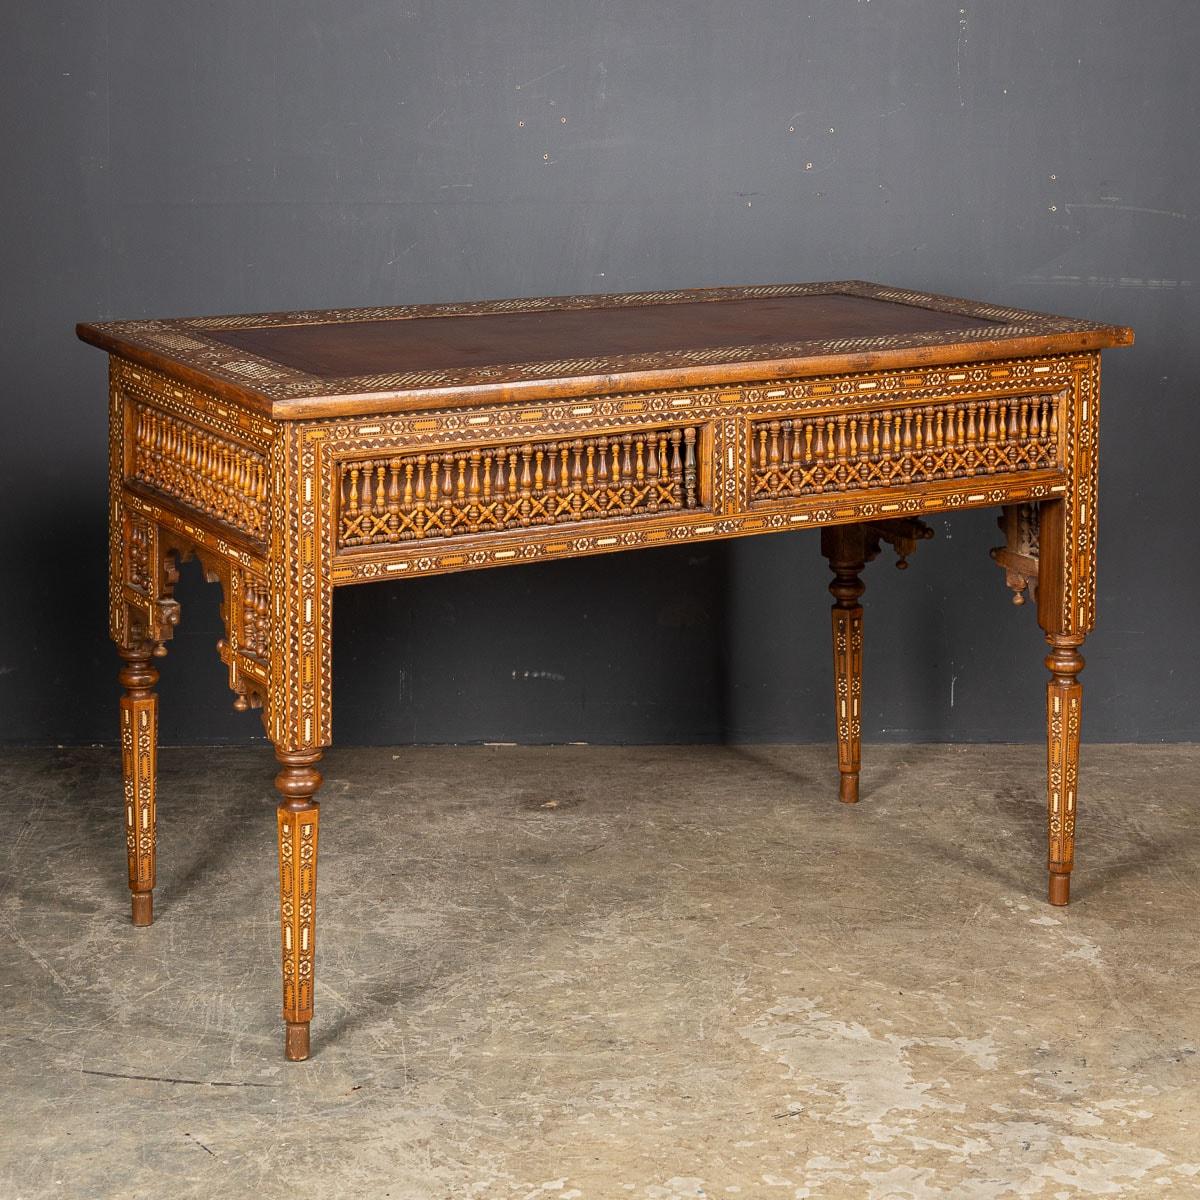 Crafted in the early 20th Century, this Levantine inlaid table is a true testament to artistry and craftsmanship. It features two discreetly concealed drawers along with a leather lined top. It's meticulously handmade from sturdy hardwood. The